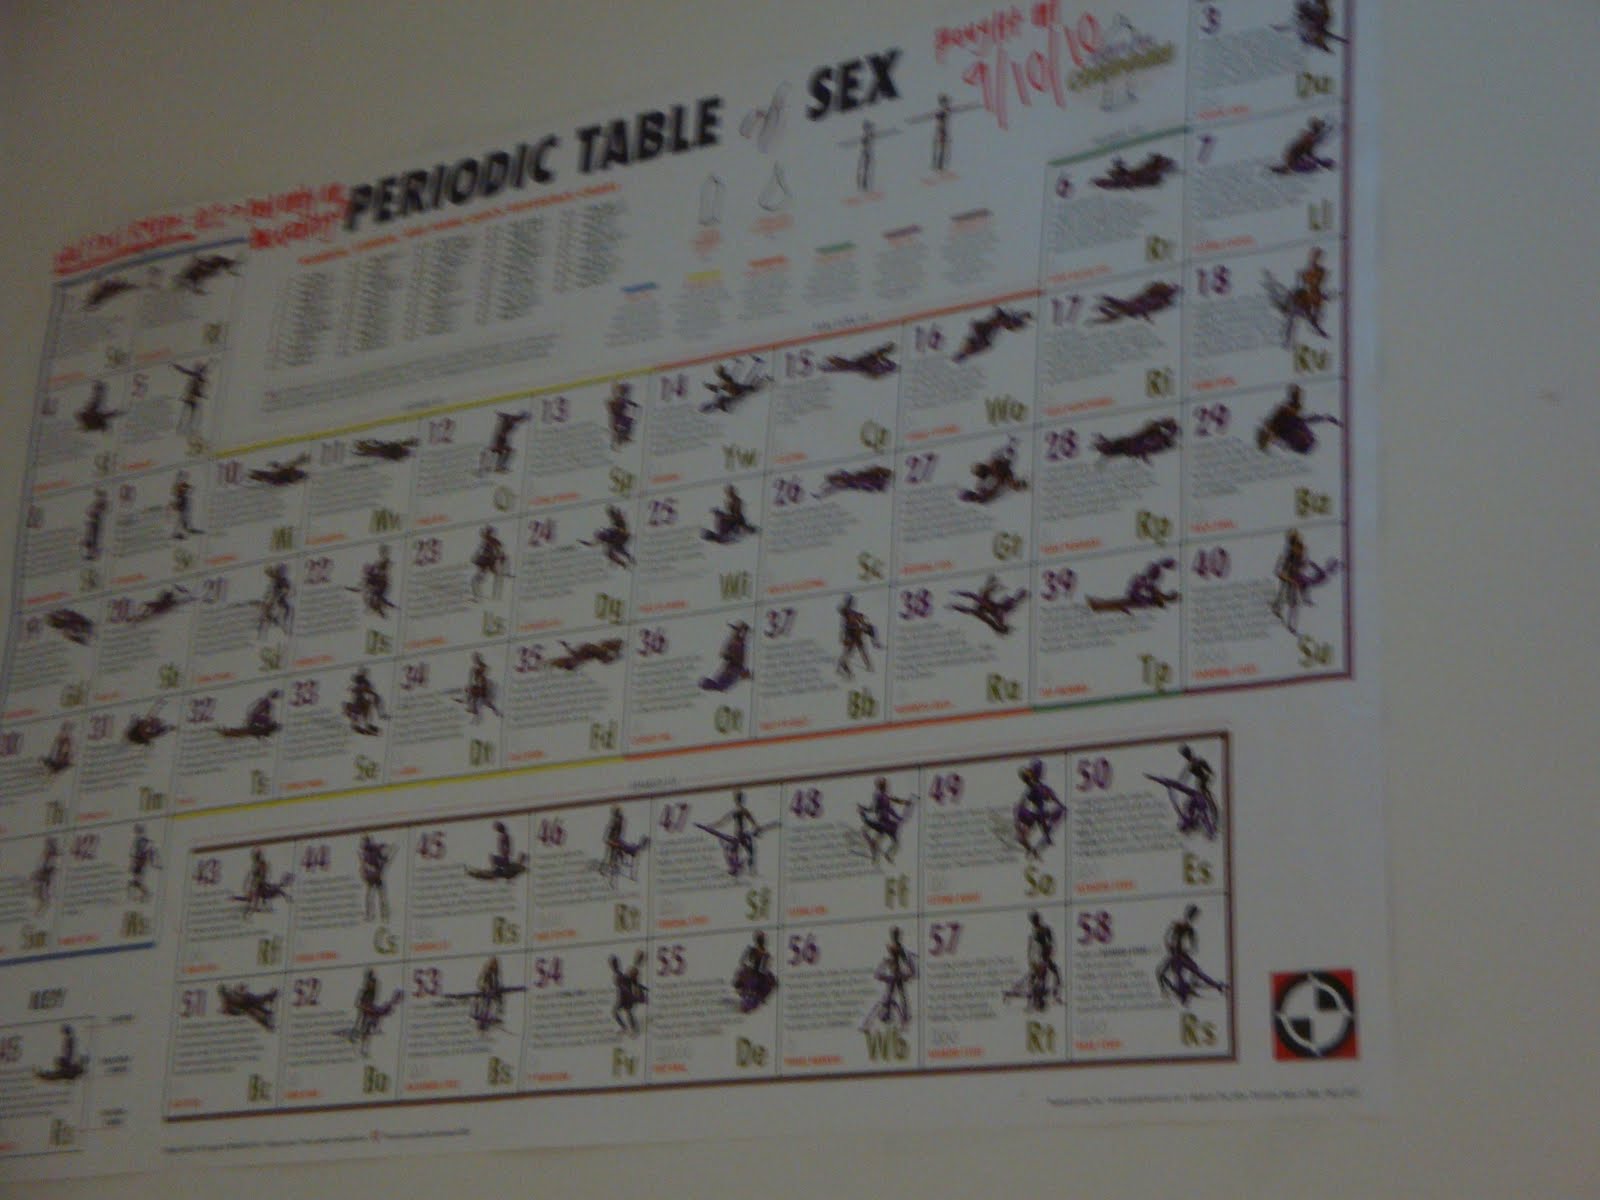 Periodic Table Of Sex Positions Poster 100